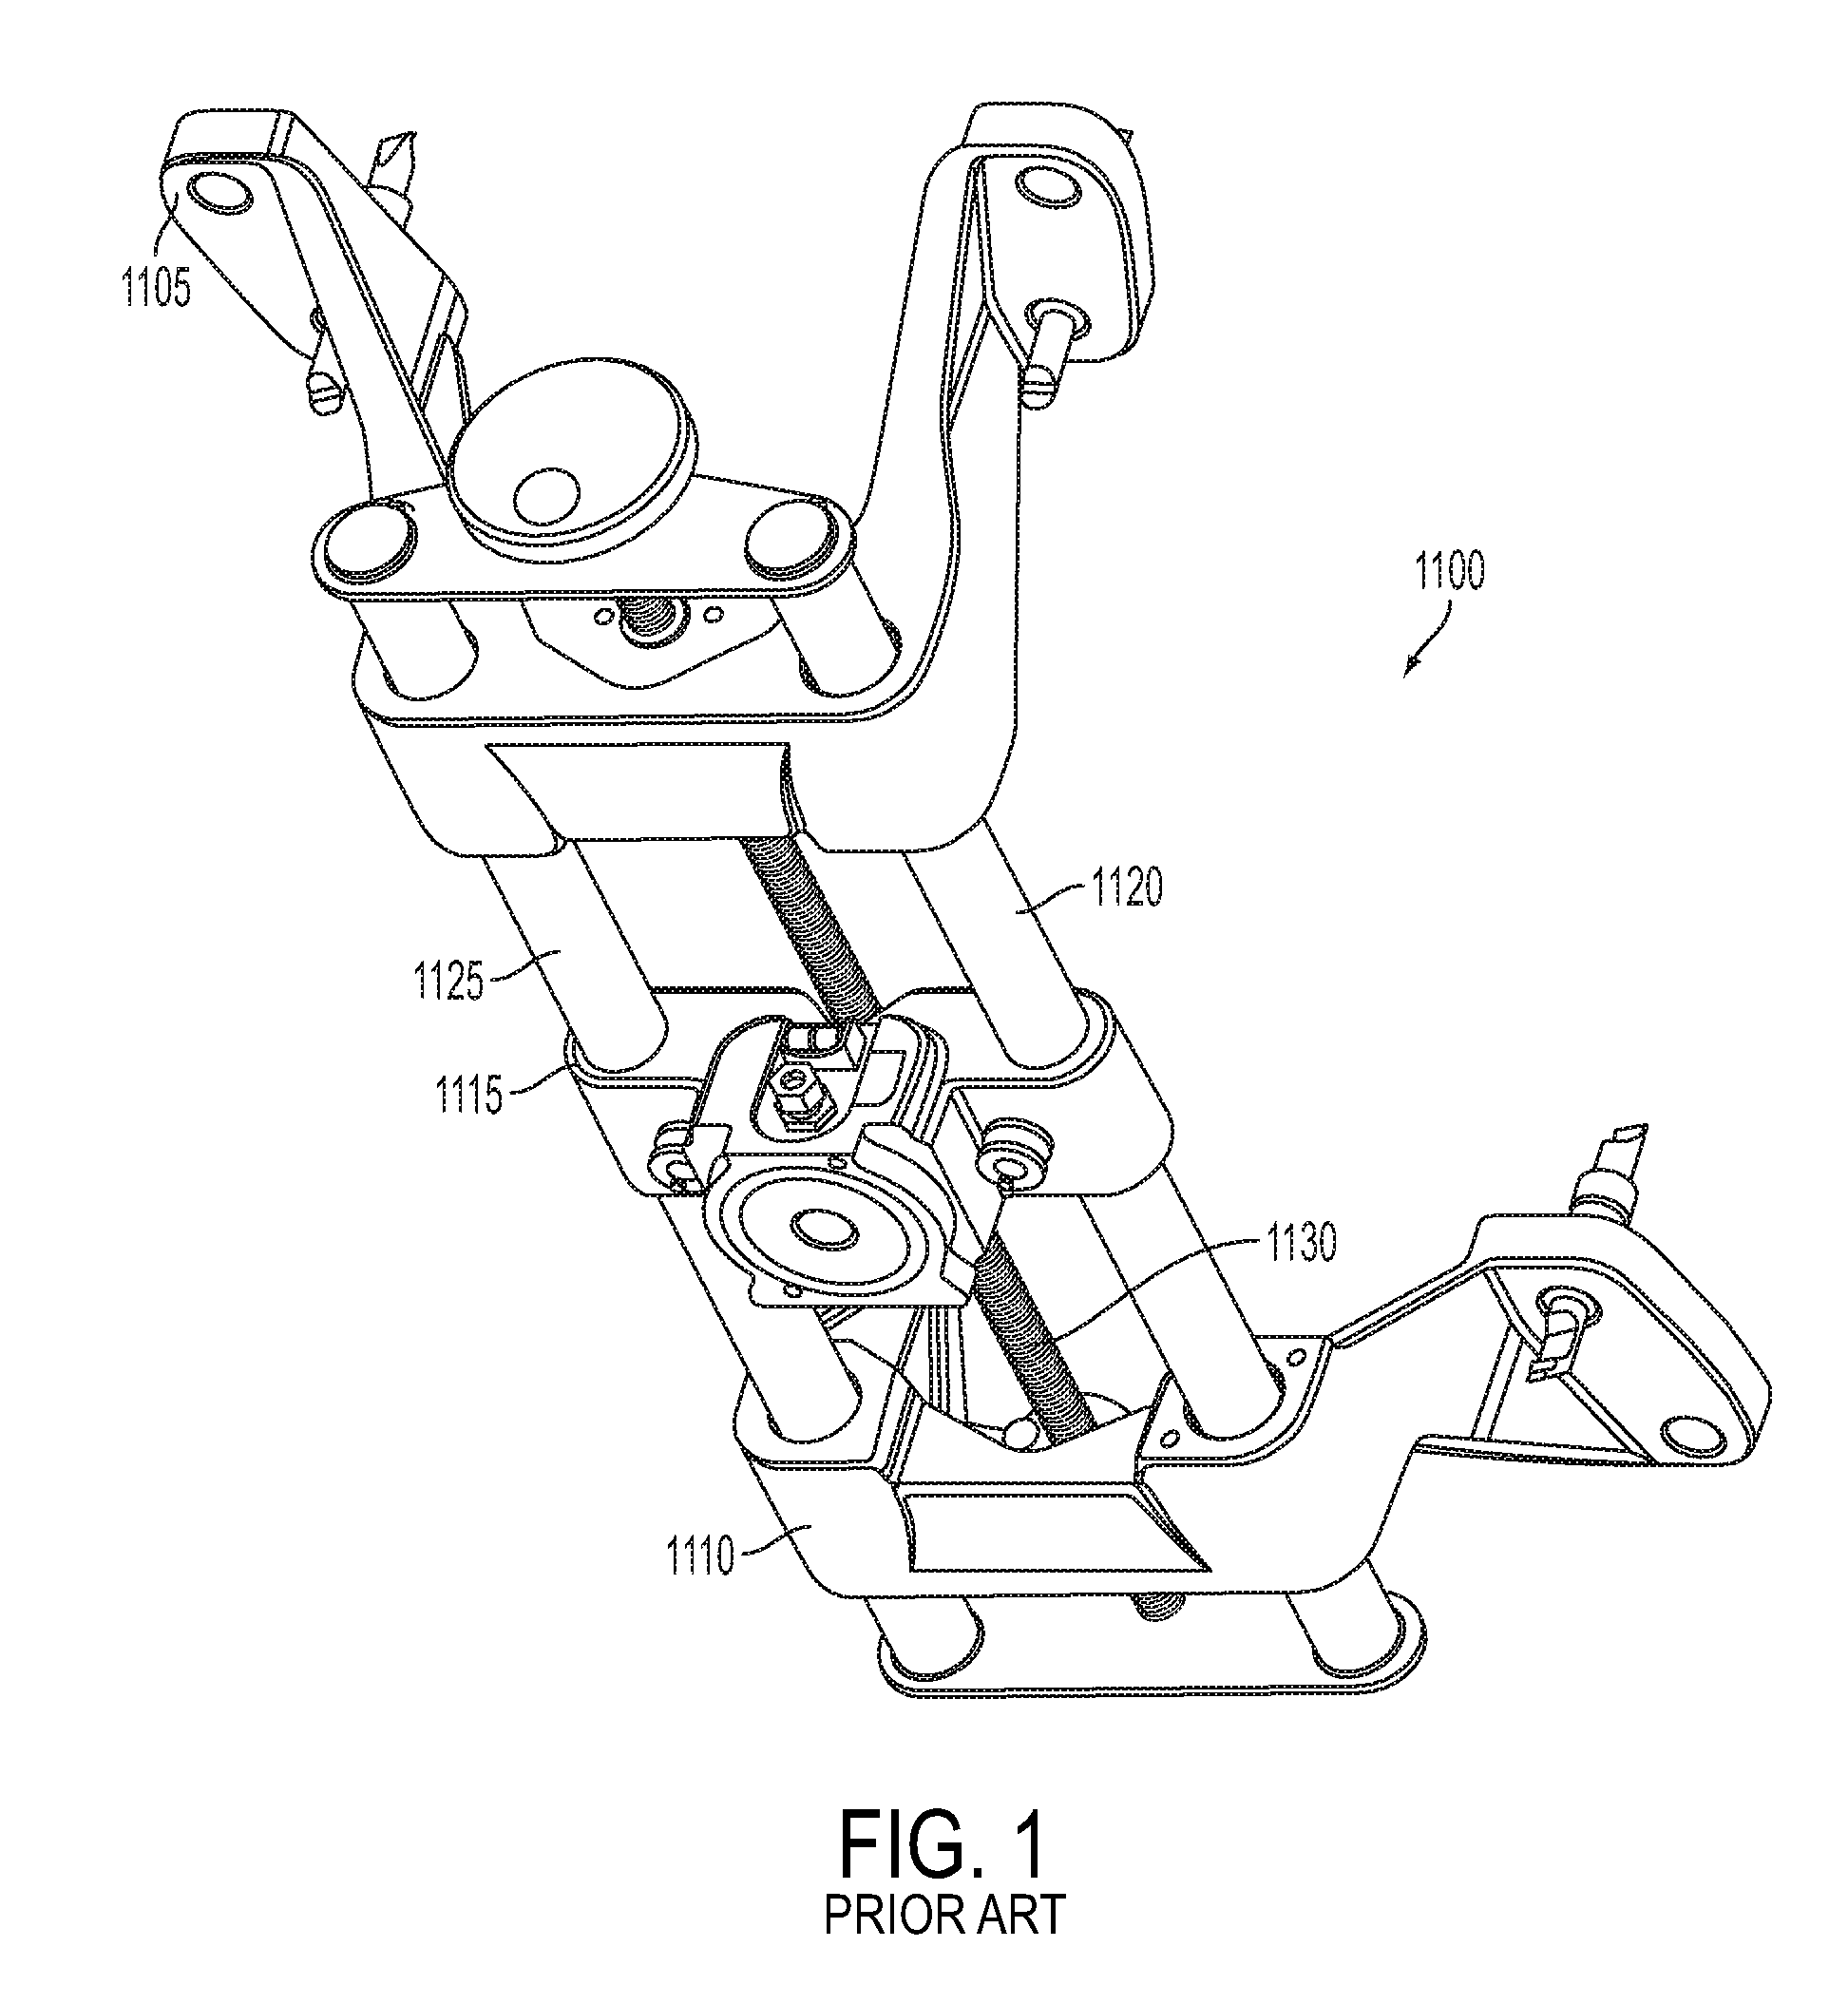 Lightweight wheel clamp for vehicle wheel alignment system